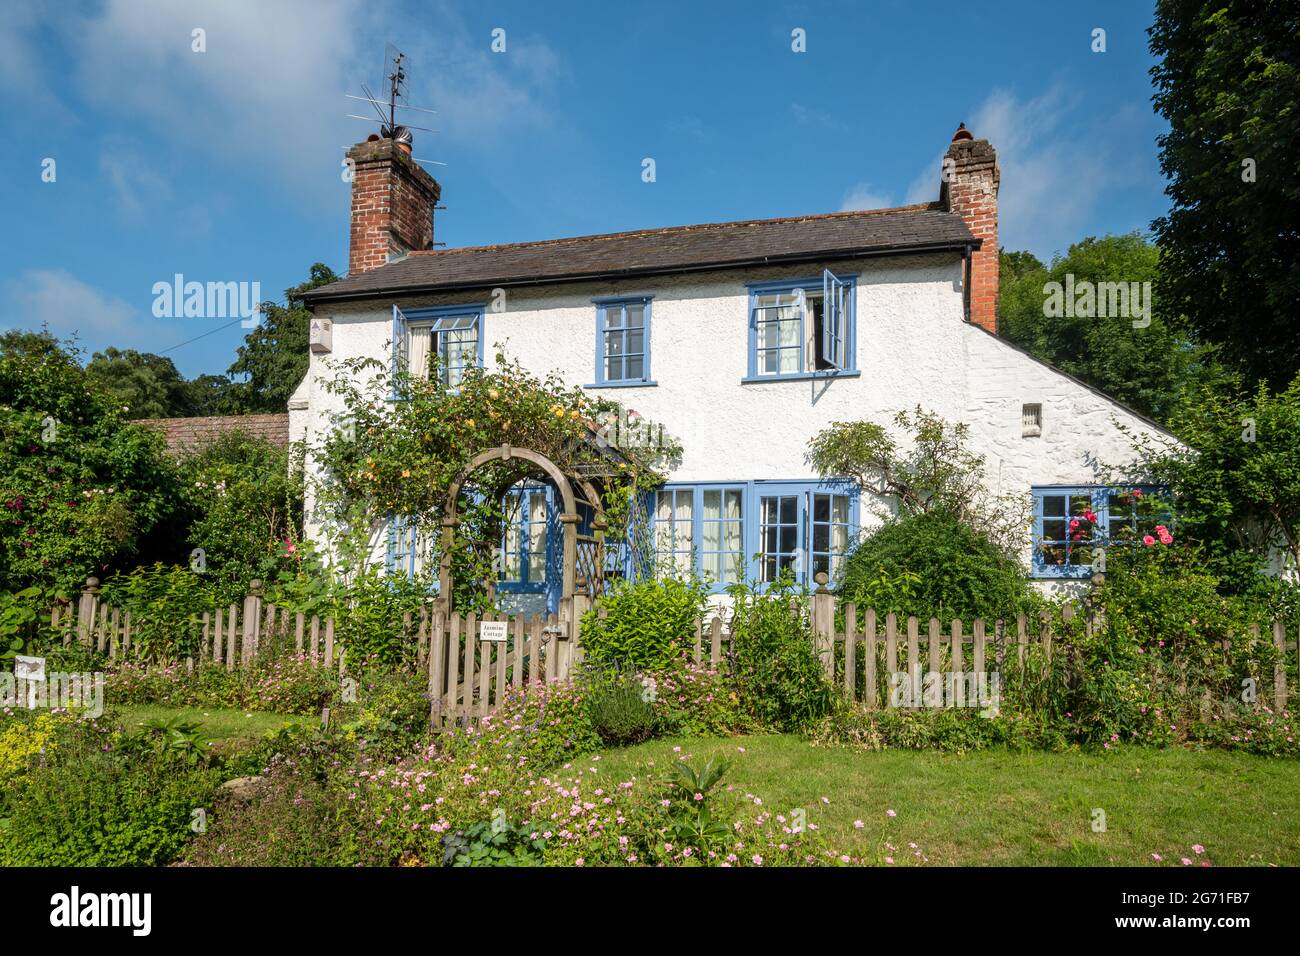 Pretty cottage and garden in Peaslake, a village in the Surrey Hills AONB, England, UK Stock Photo